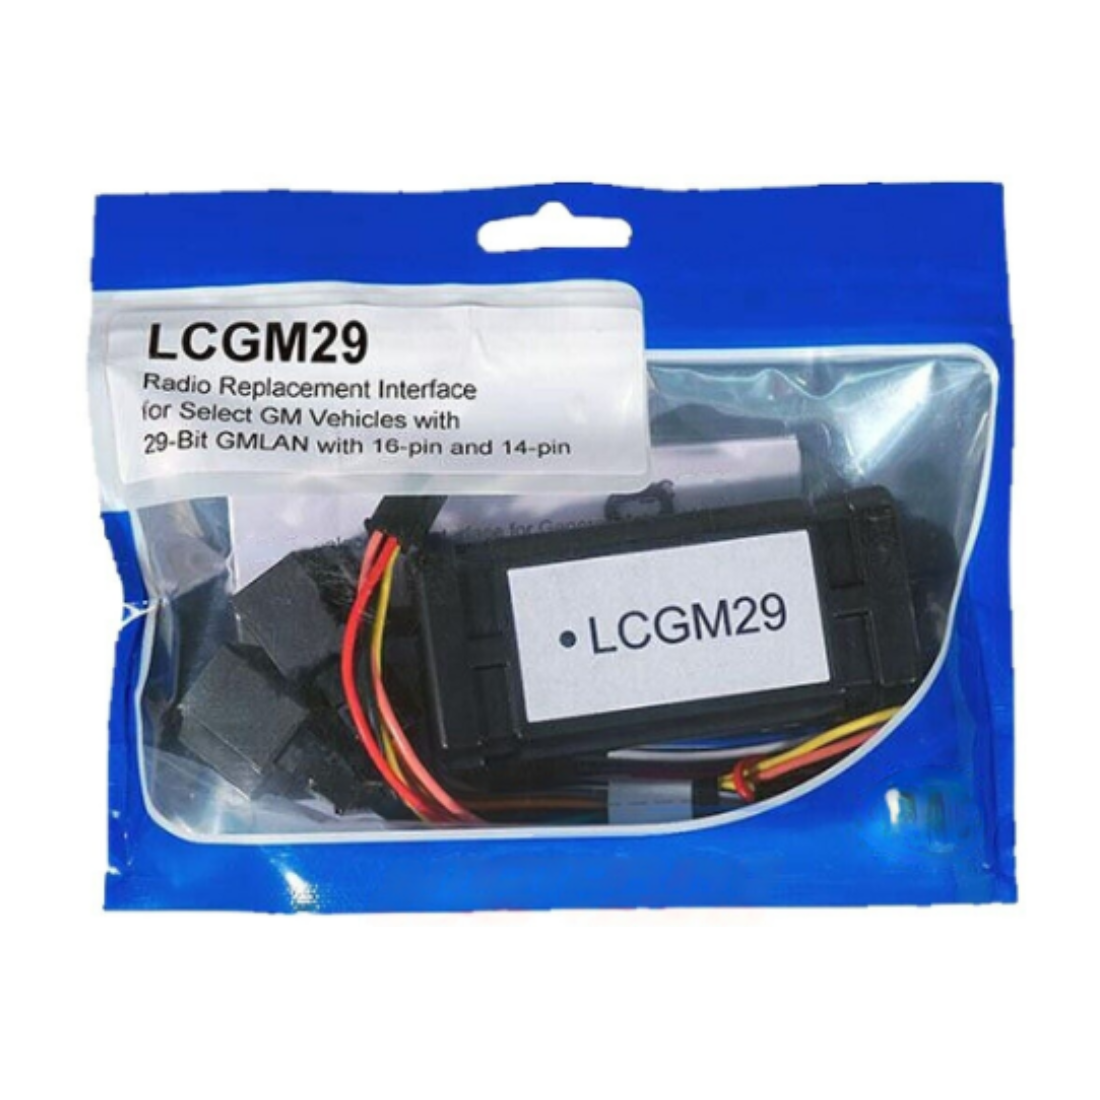 PAC LCGM29 Radio Replacement Interface for GM 29-bit LAN Vehicles w/o On-Star